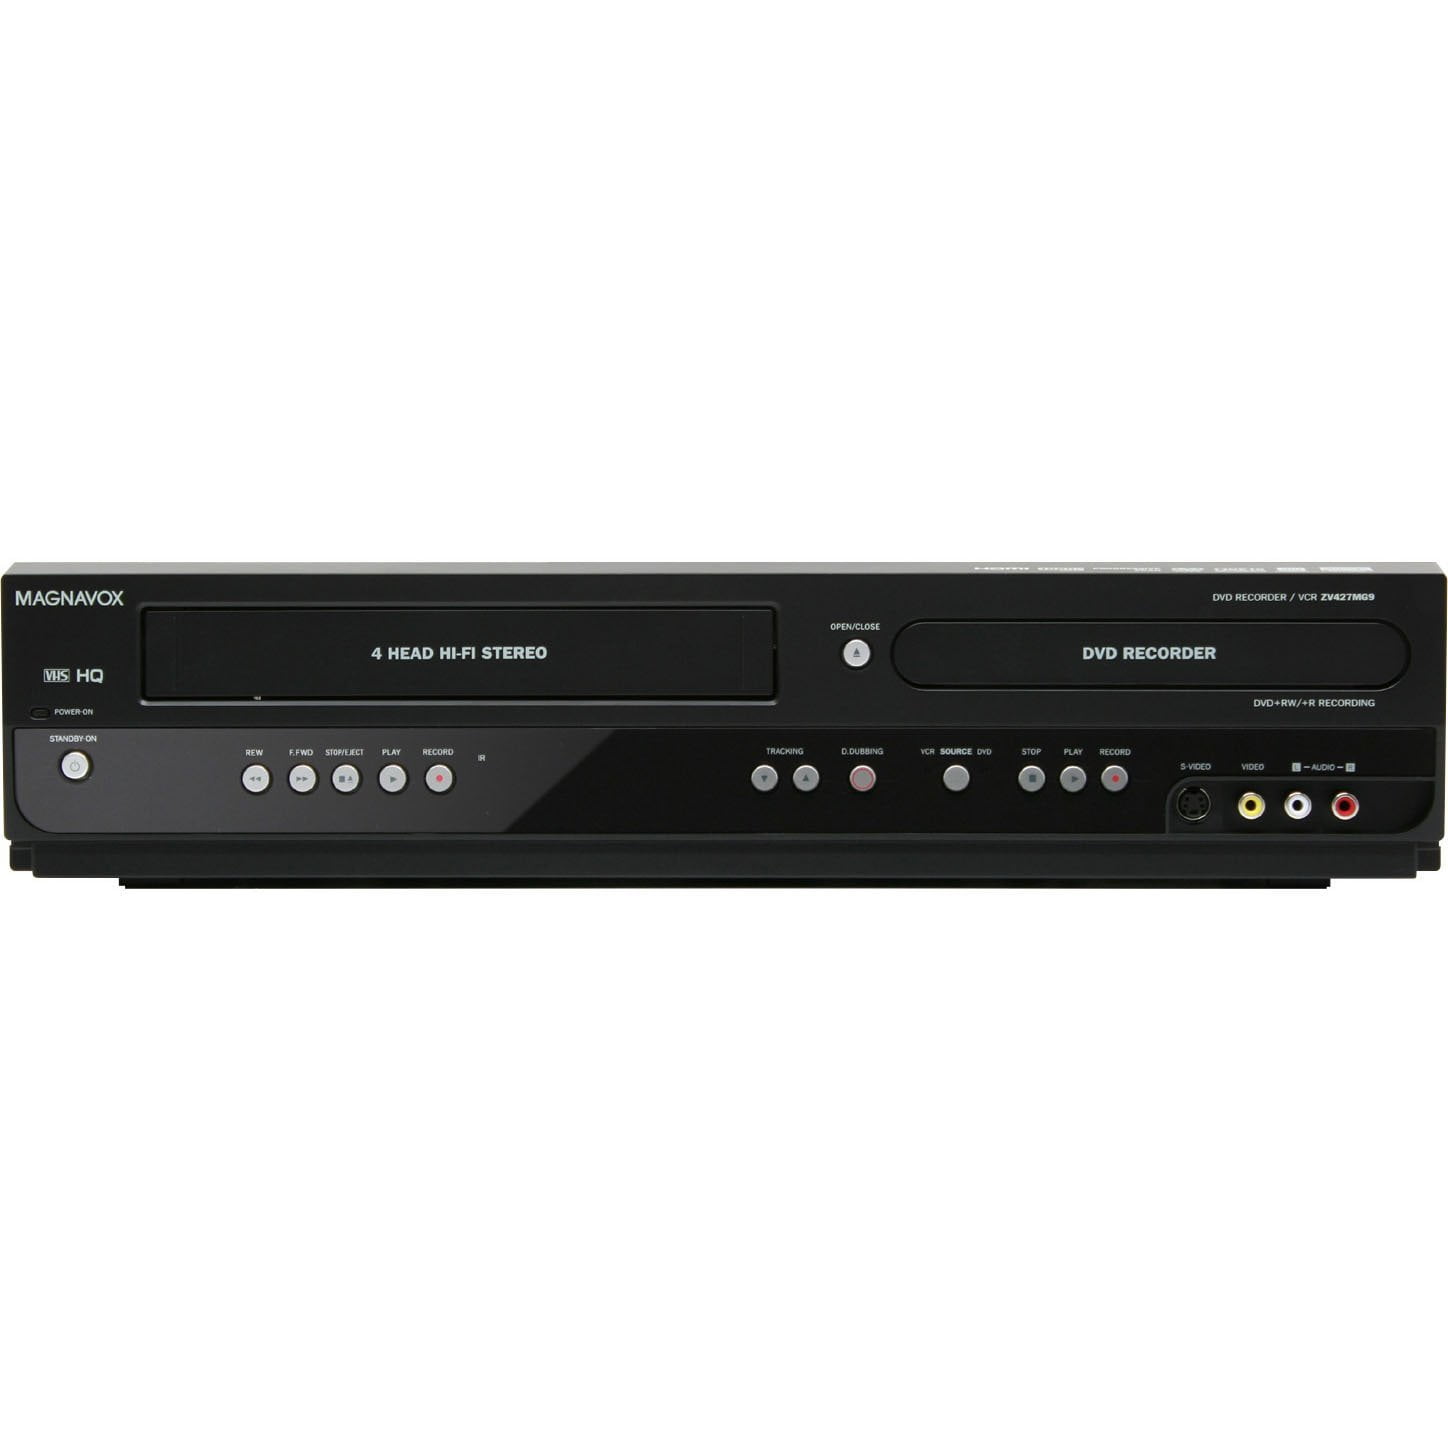 ZV427MG9 DVD Recorder/VCR (USED). Comes with Original Remote, Manual, HDMI and AV Cables. - Walmart.com